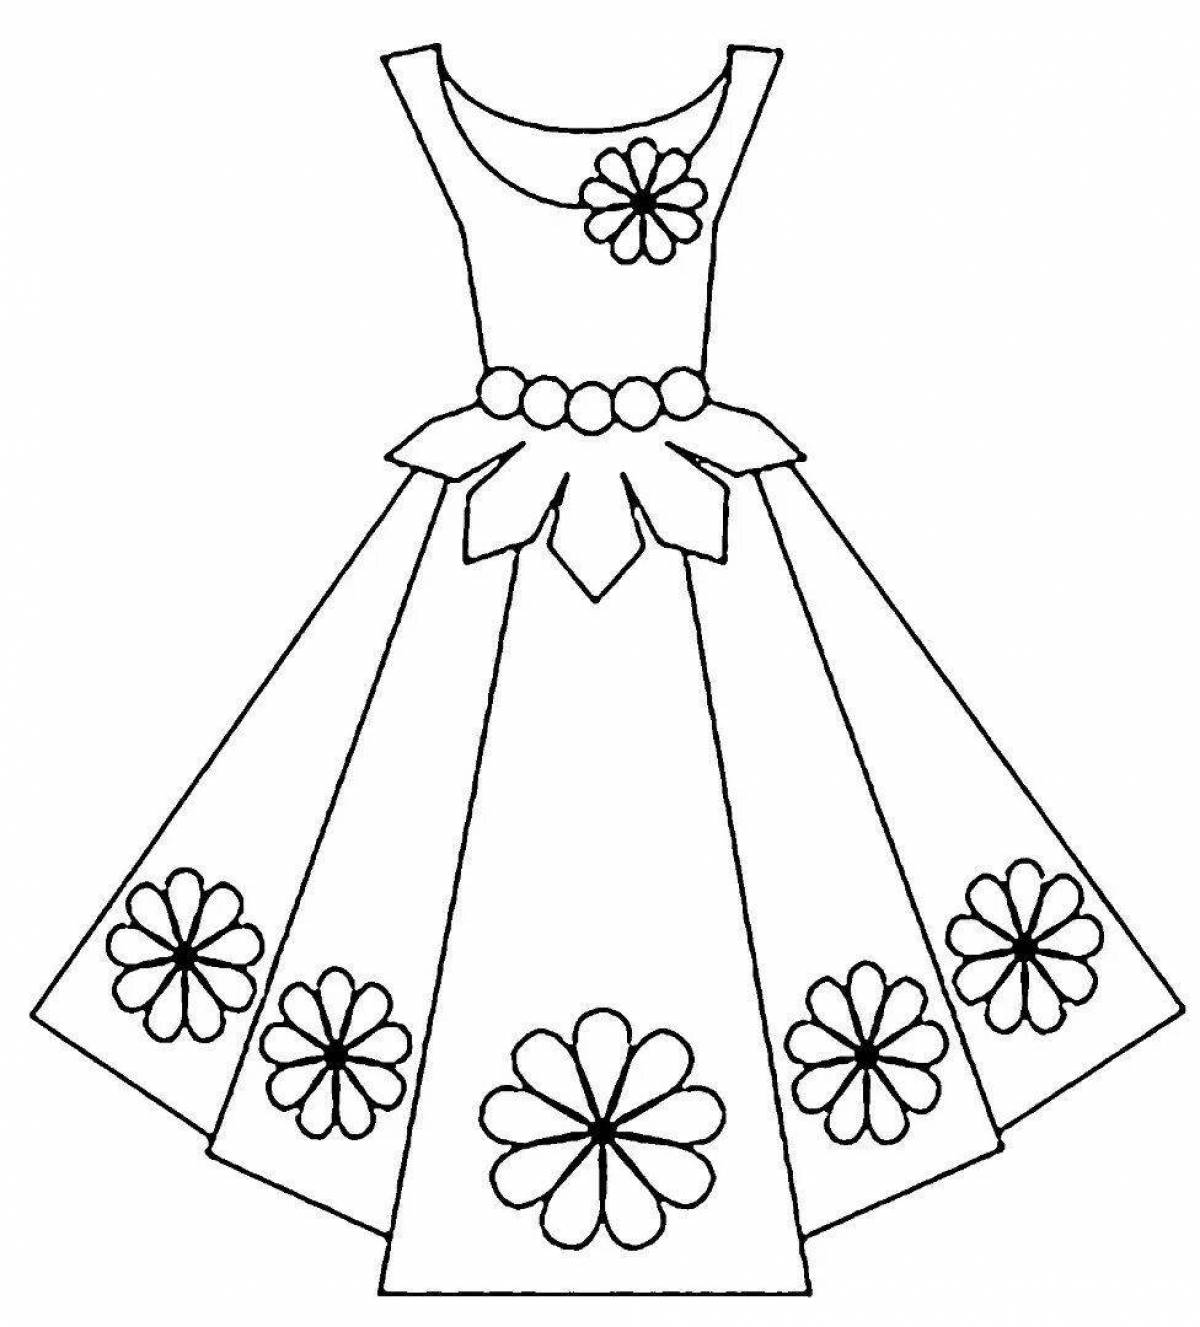 Creative sundress pattern coloring book for kids